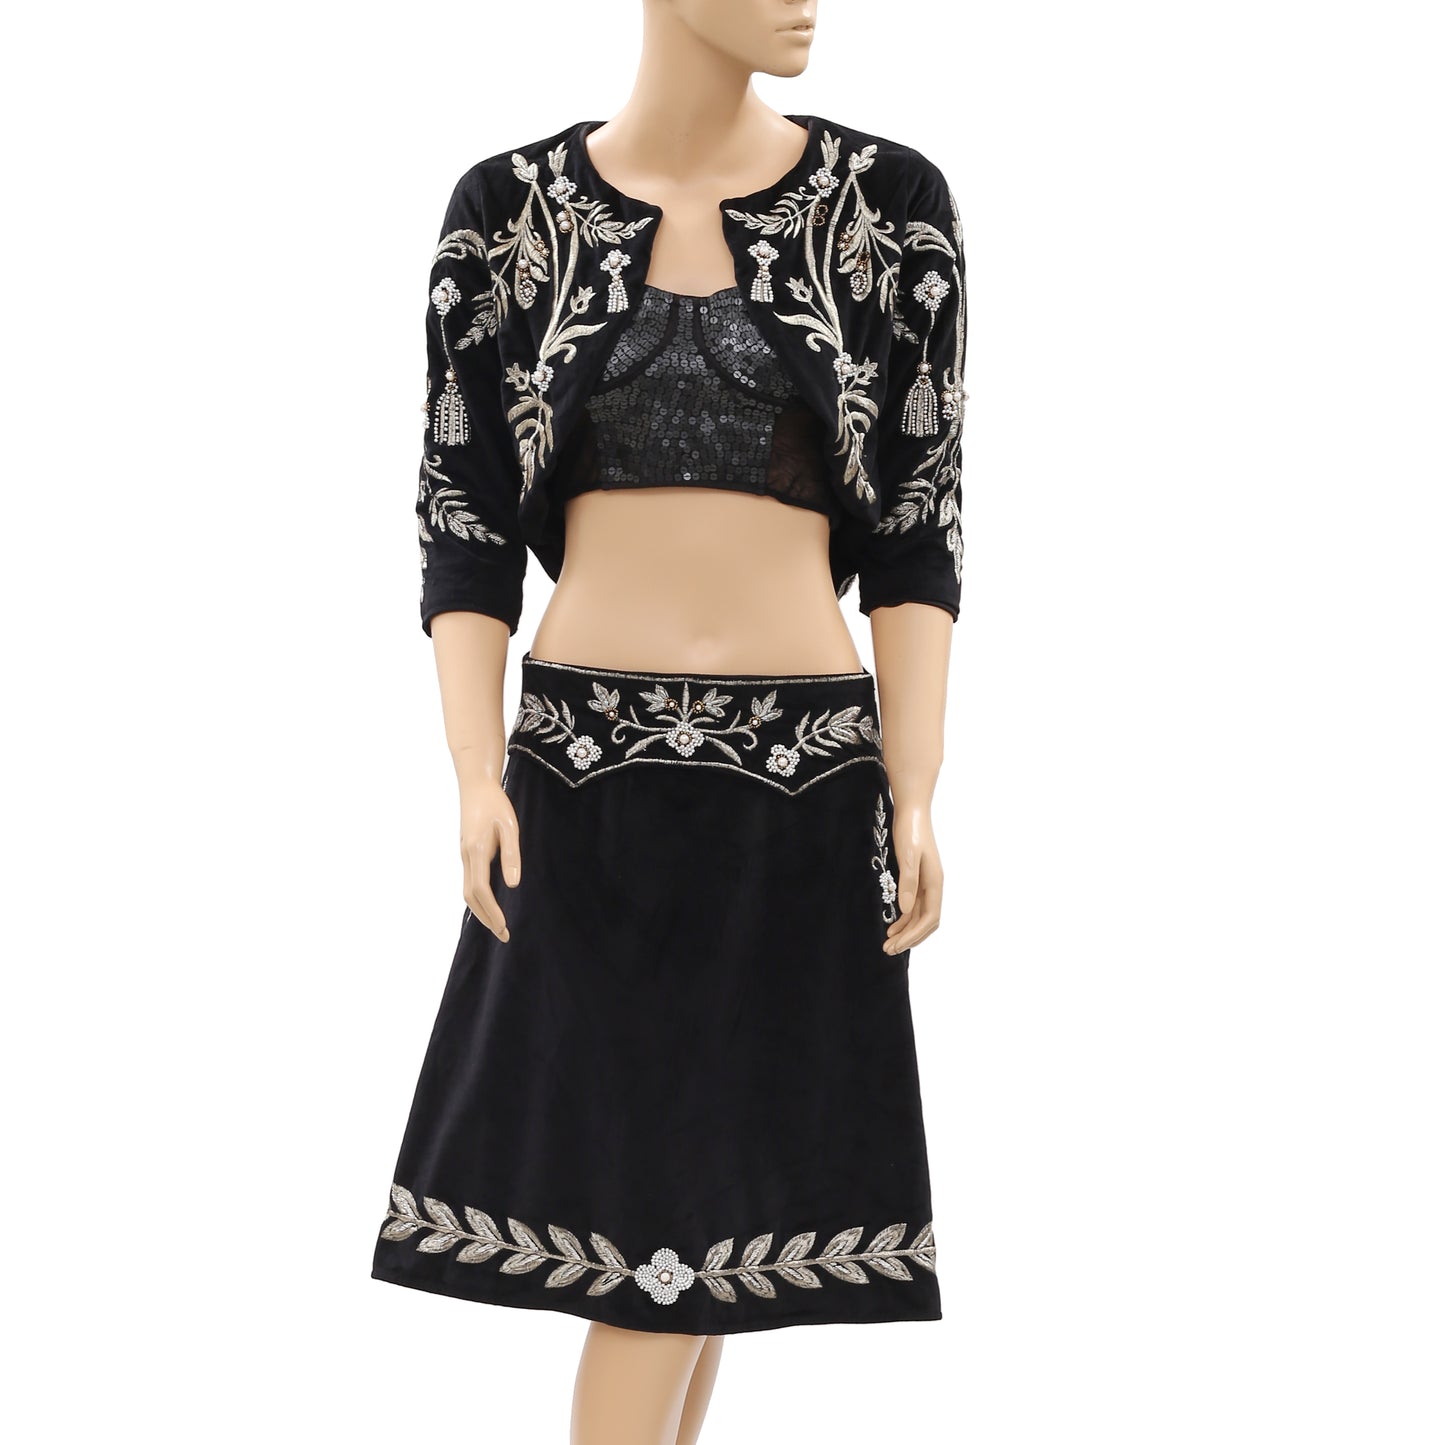 Nj Couture Floral Embroidered Crop Top Skirt Set S